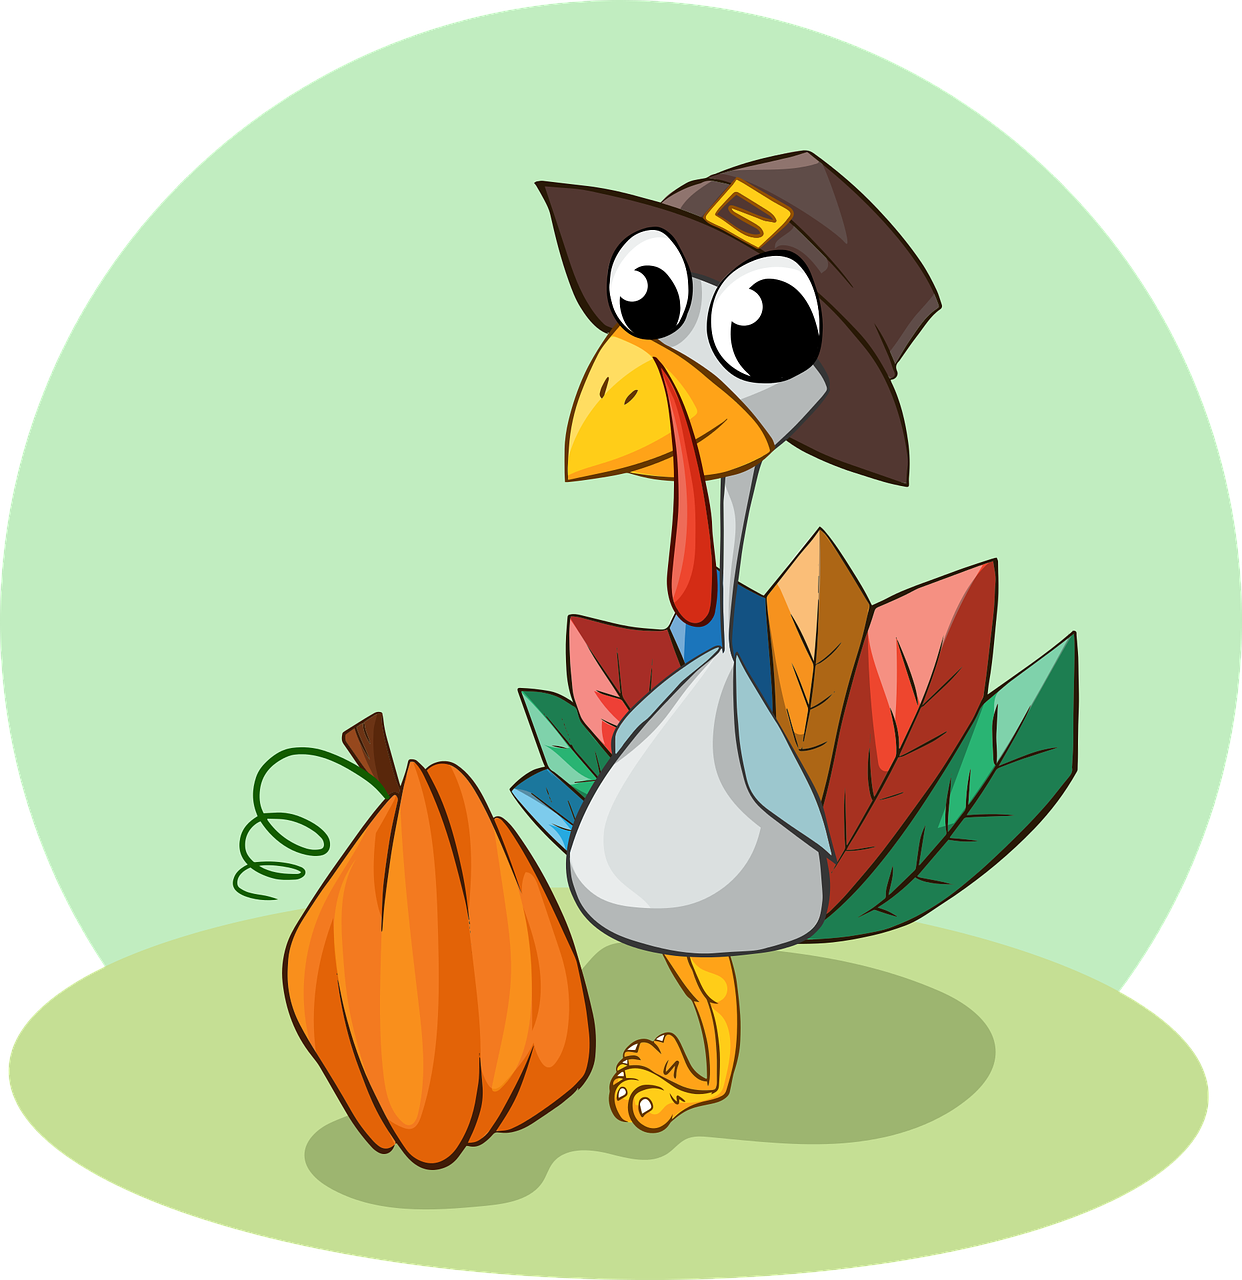 Add another feather to. Feathers clipart thanksgiving